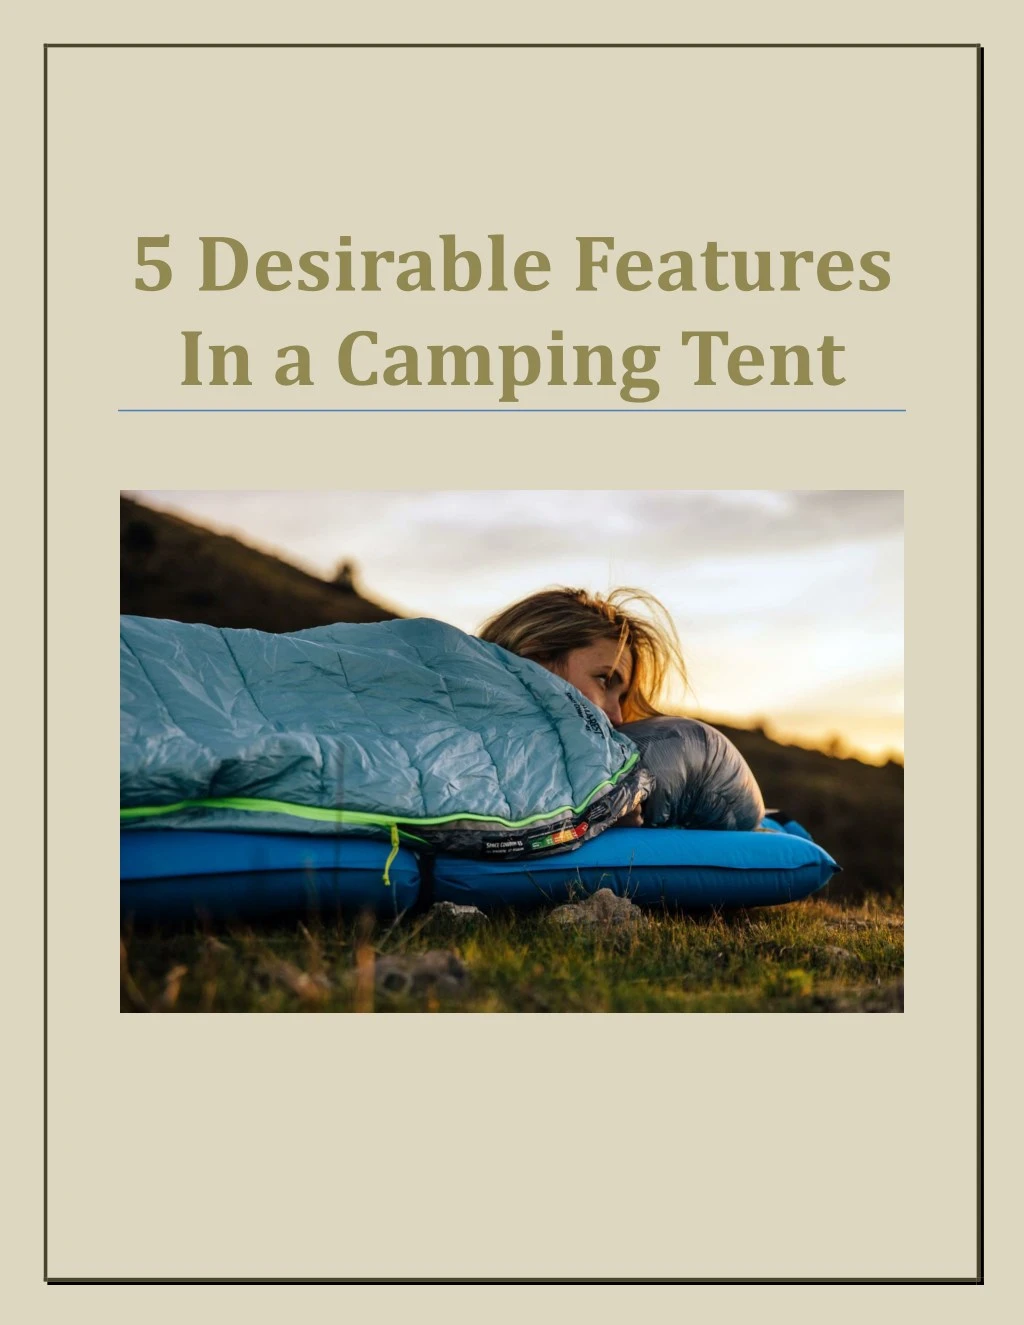 5 desirable features in a camping tent